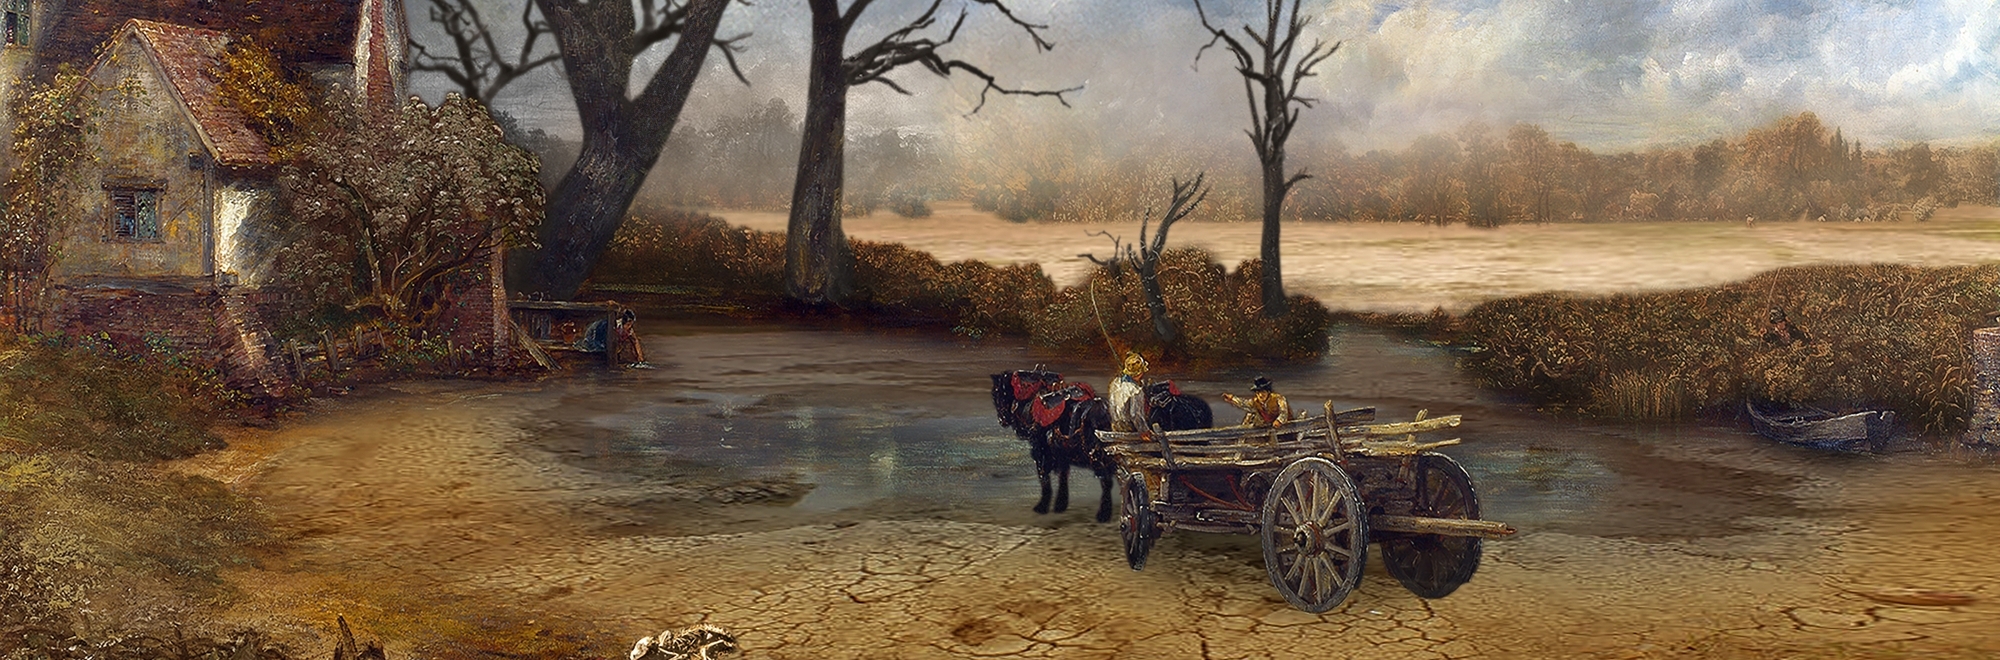 Classic paintings recreated for a world in climate crisis